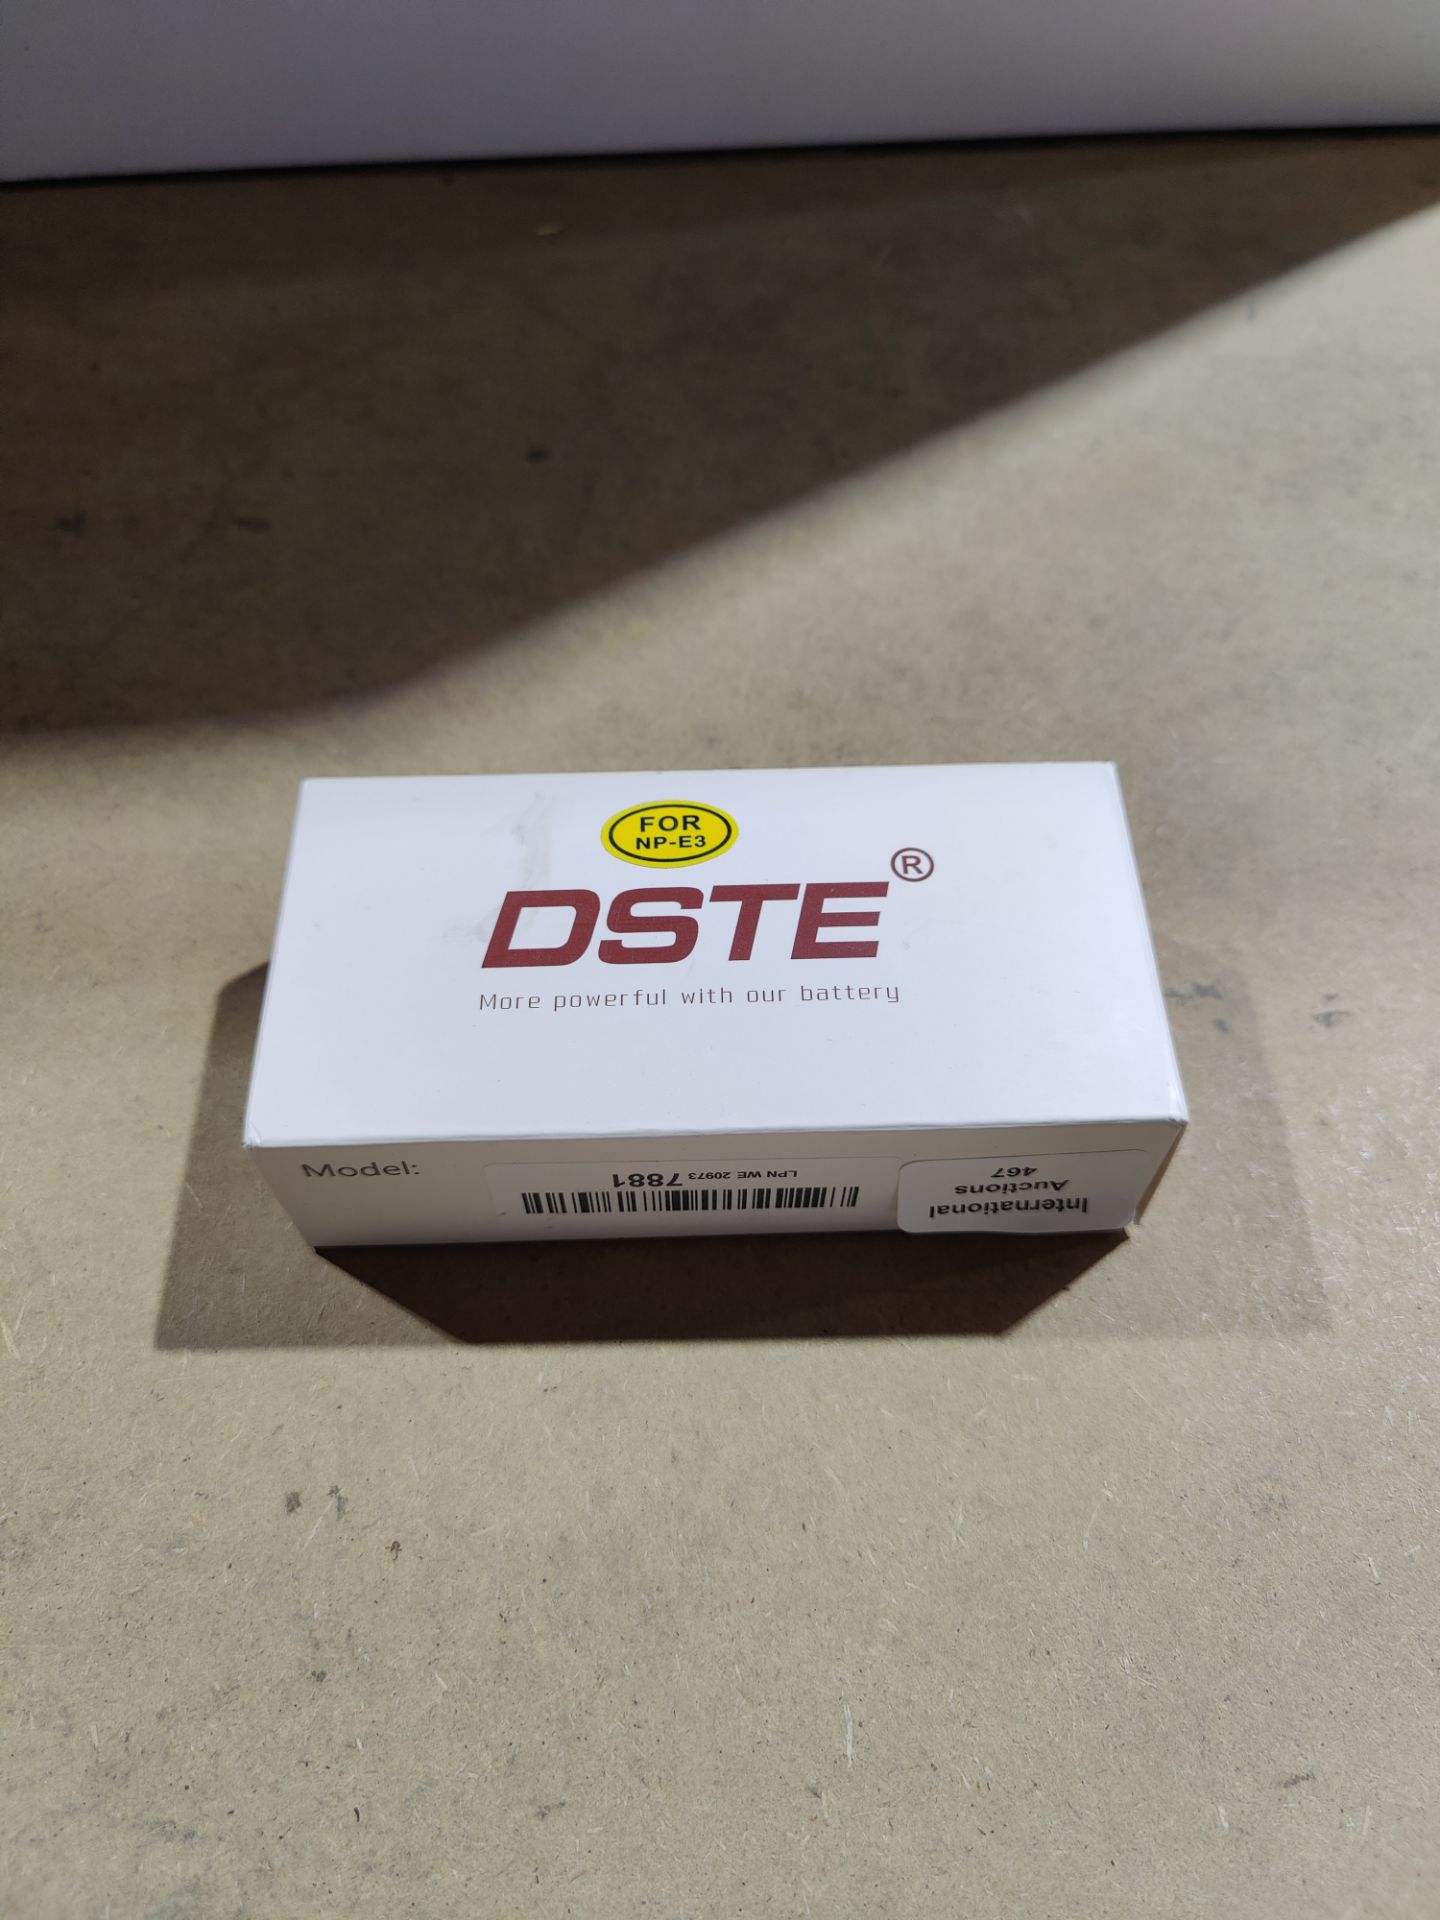 RRP £28.88 DSTE 2300mAh NP-E3 NPE3 Ni-MH Battery Compatible with - Image 2 of 2